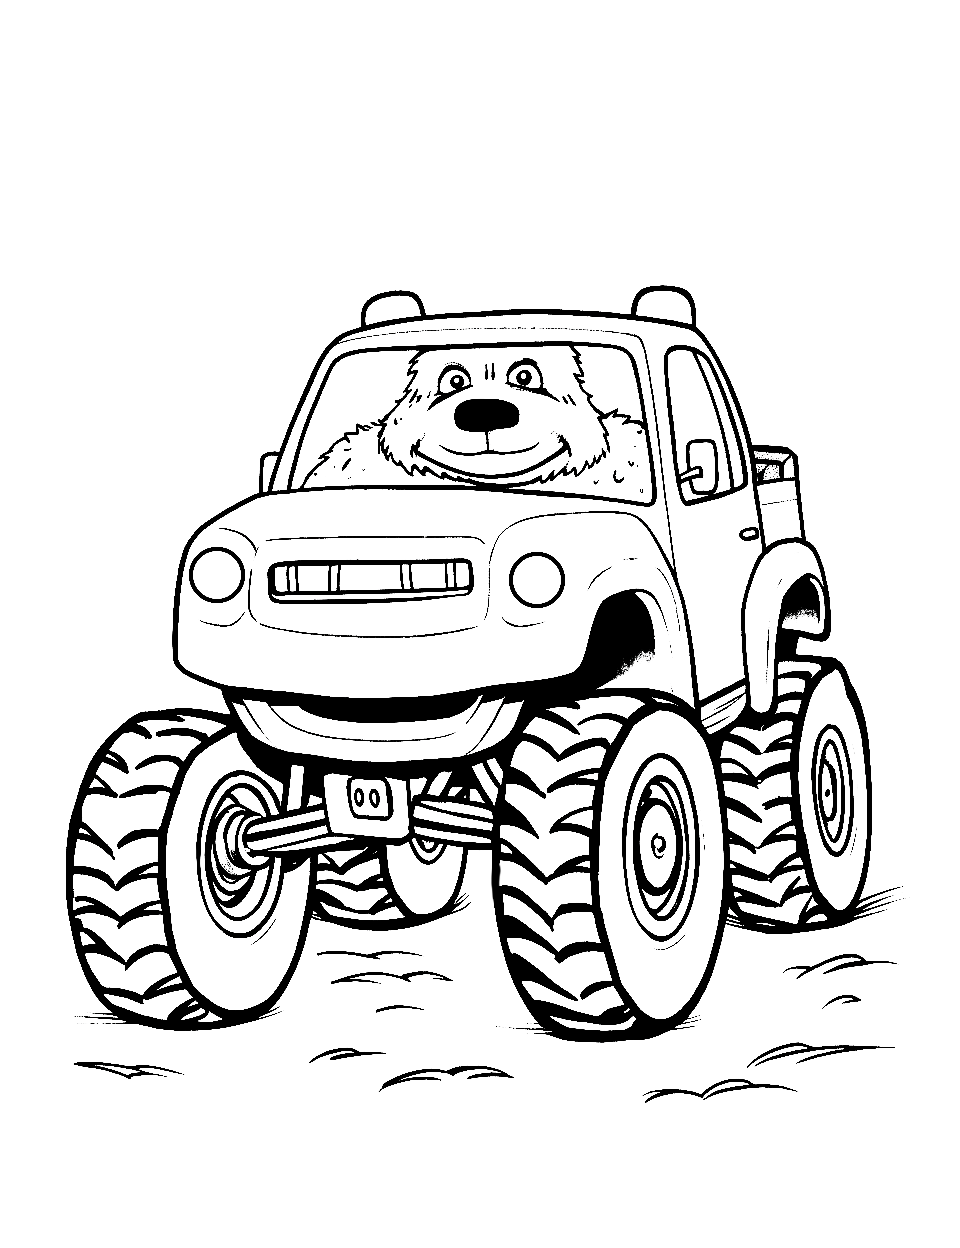 Teddy Bear's Truck Monster Coloring Page - A fluffy teddy bear driving a monster truck.